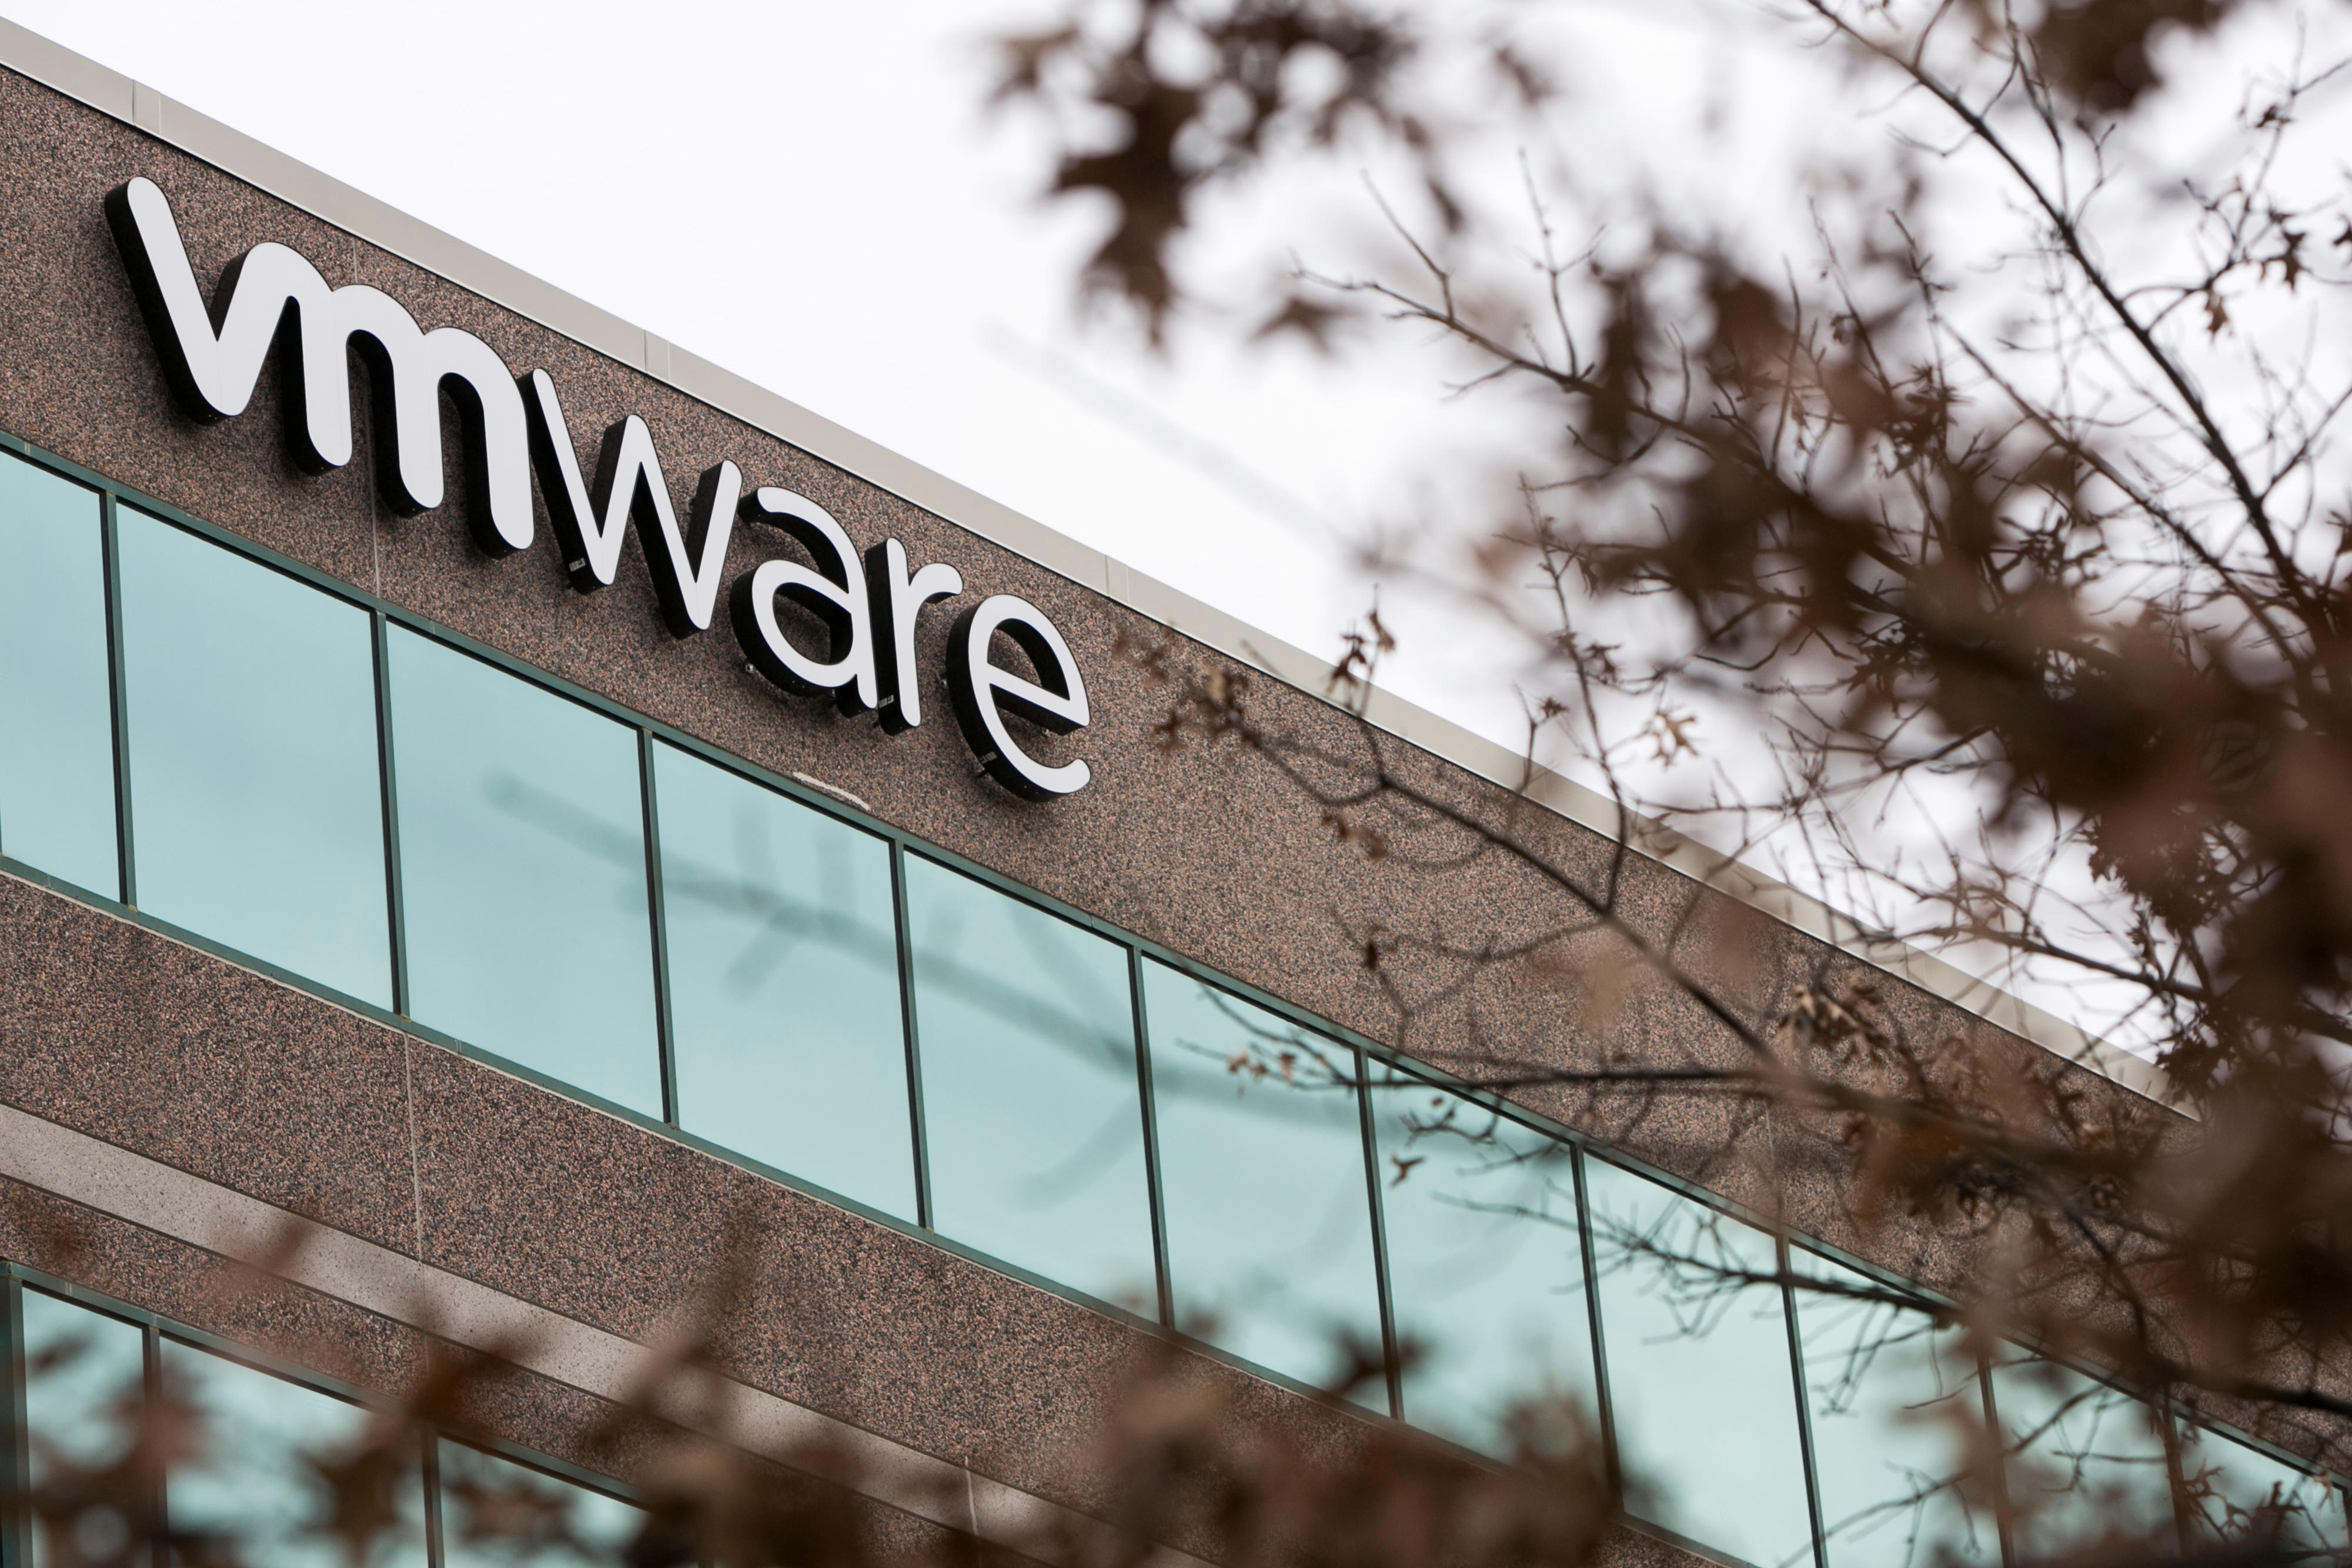 Broadcom to Buy VMware for $61 Billion in Record Tech Deal | Data Center Knowledge | News and analysis for the data center industry